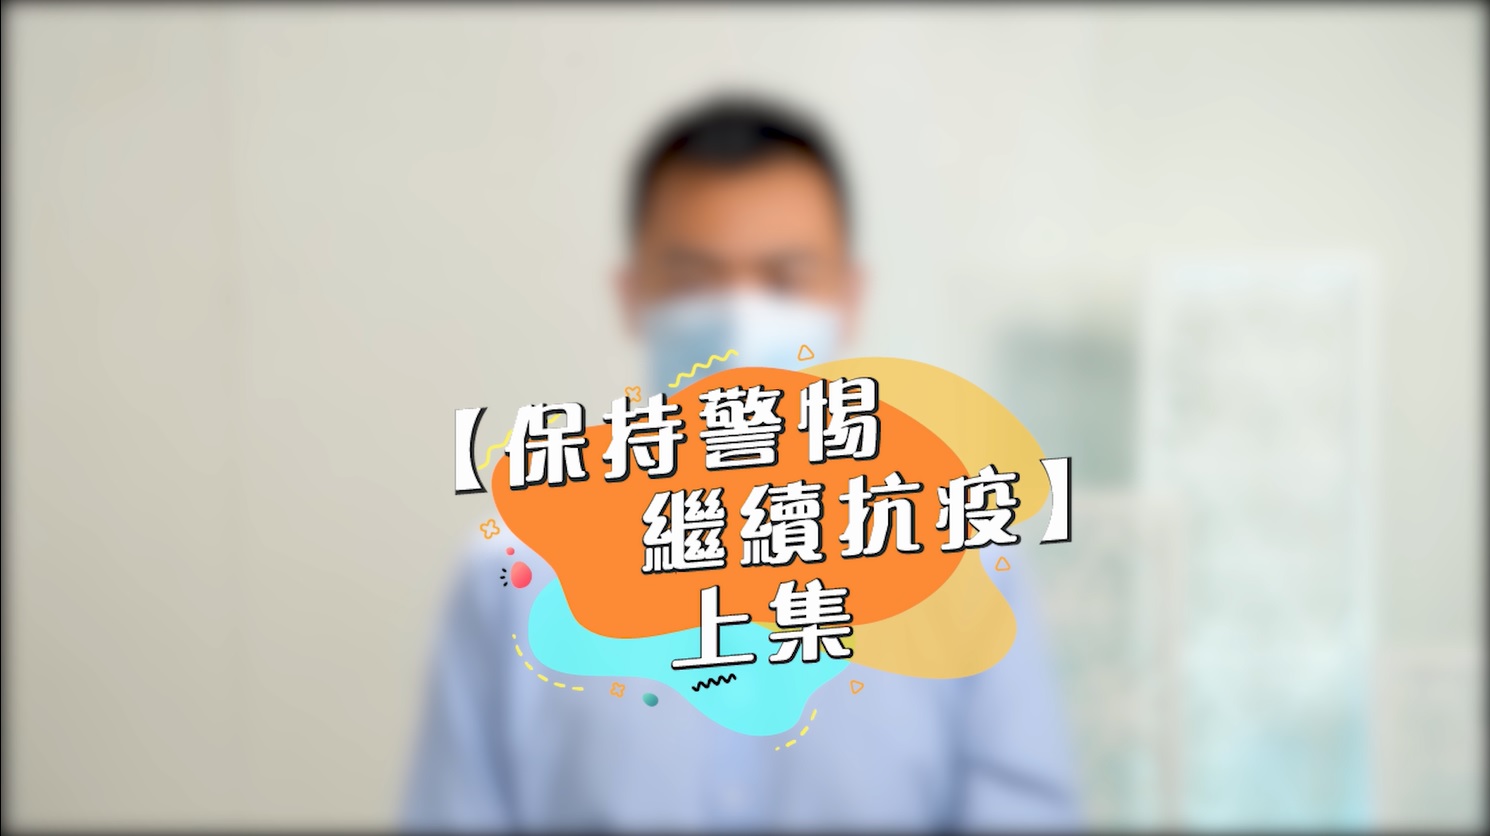 Episode 1 (Part A) Stay Alert to Fight against Virus (Cantonese)